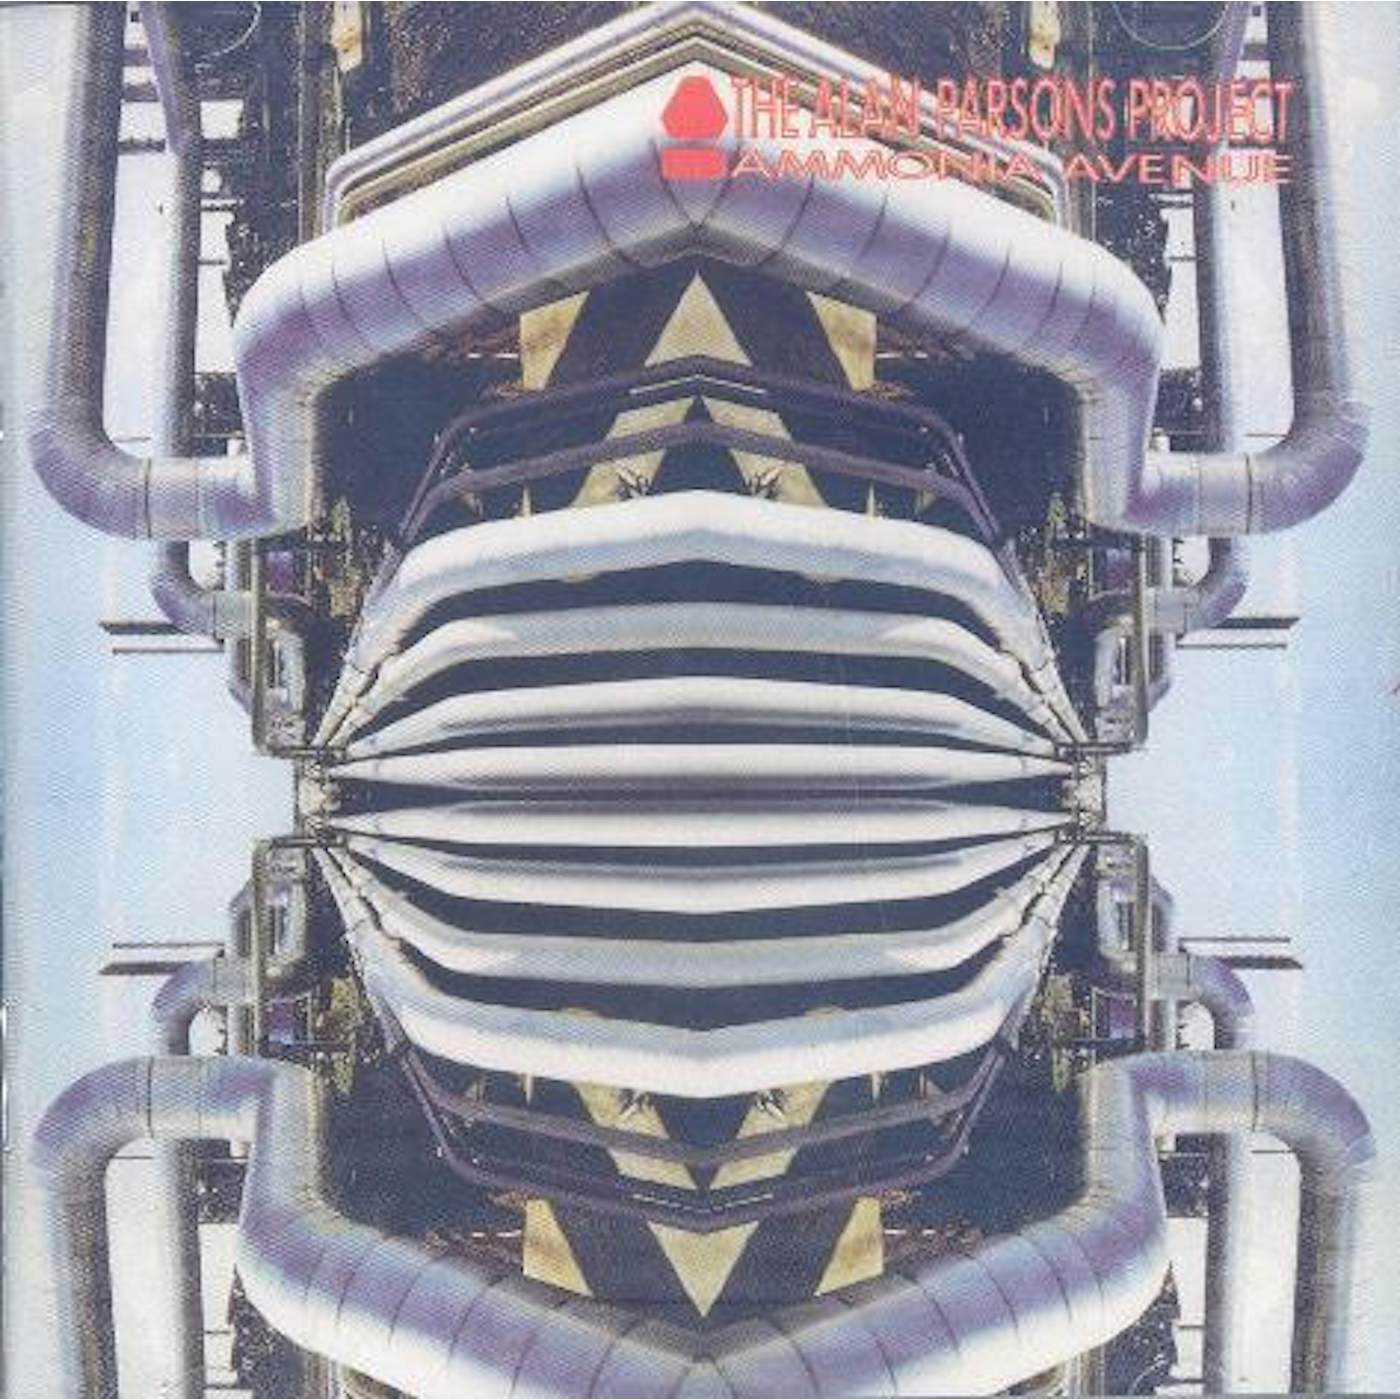 The Alan Parsons Project AMMONIA AVENUE CD